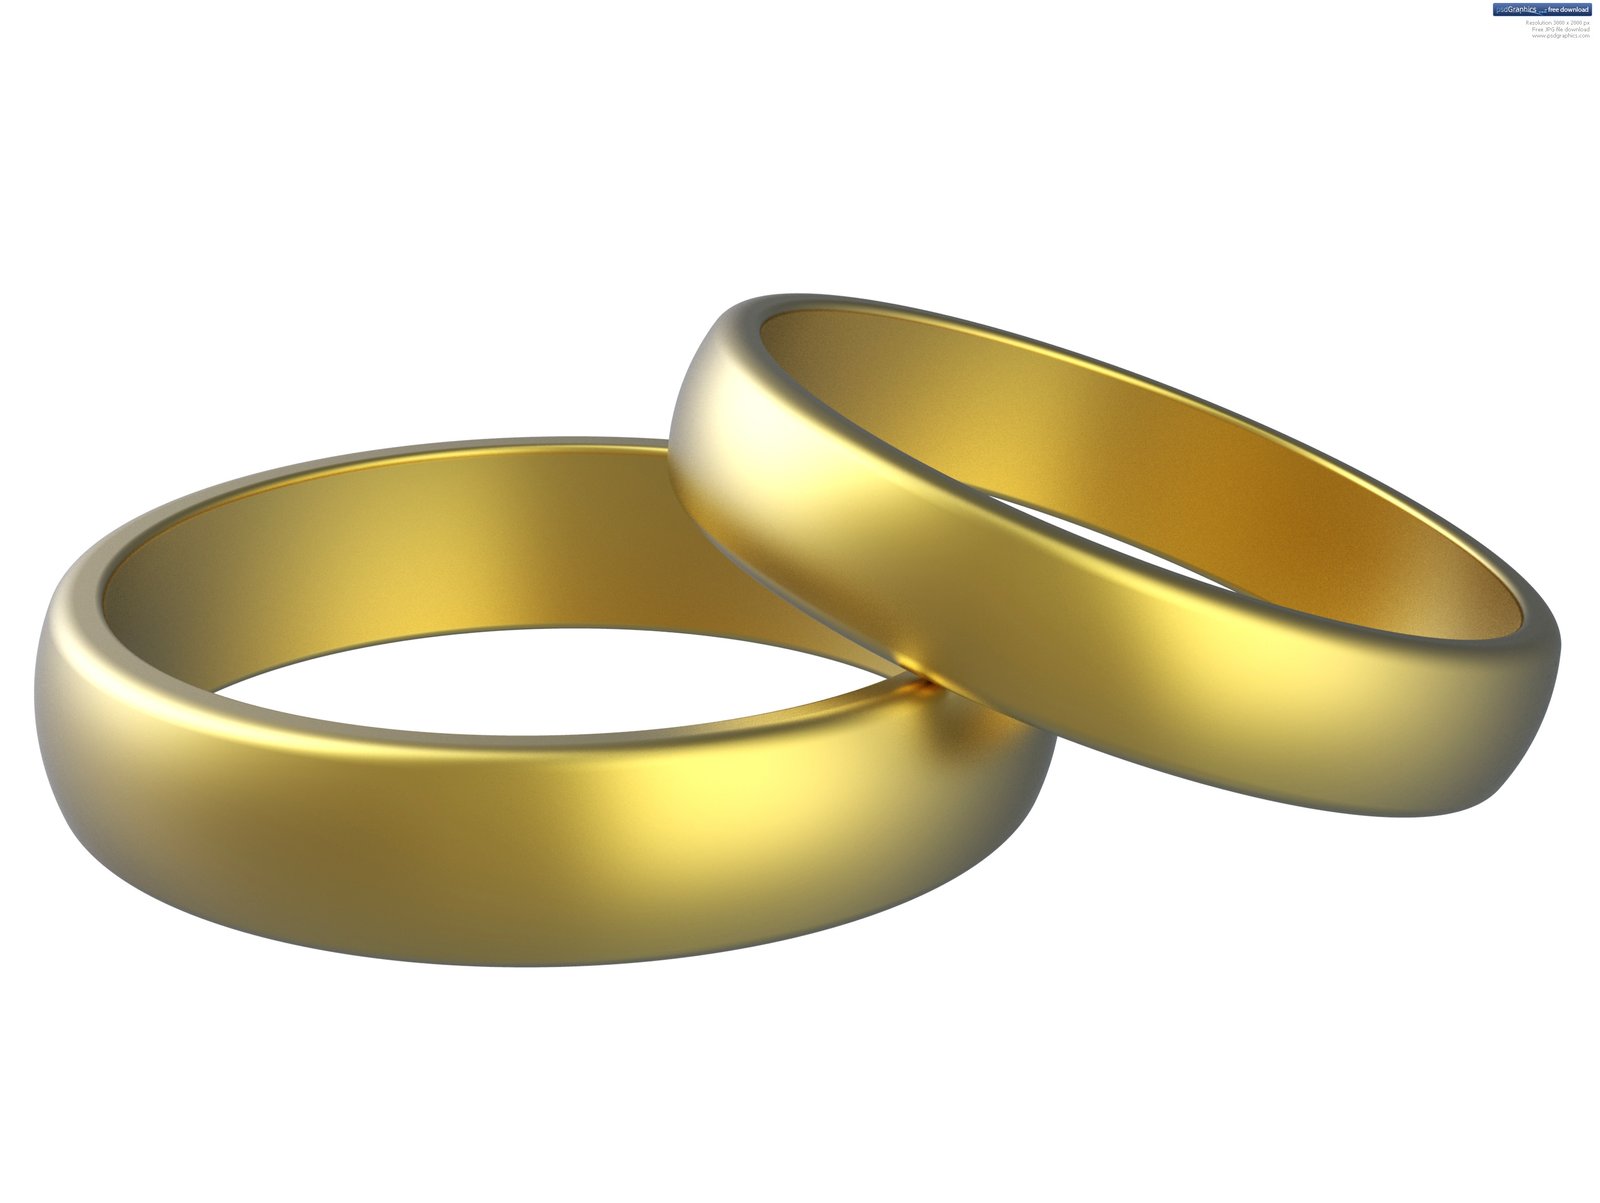 Gold Wedding Rings Clip Art. Related Images